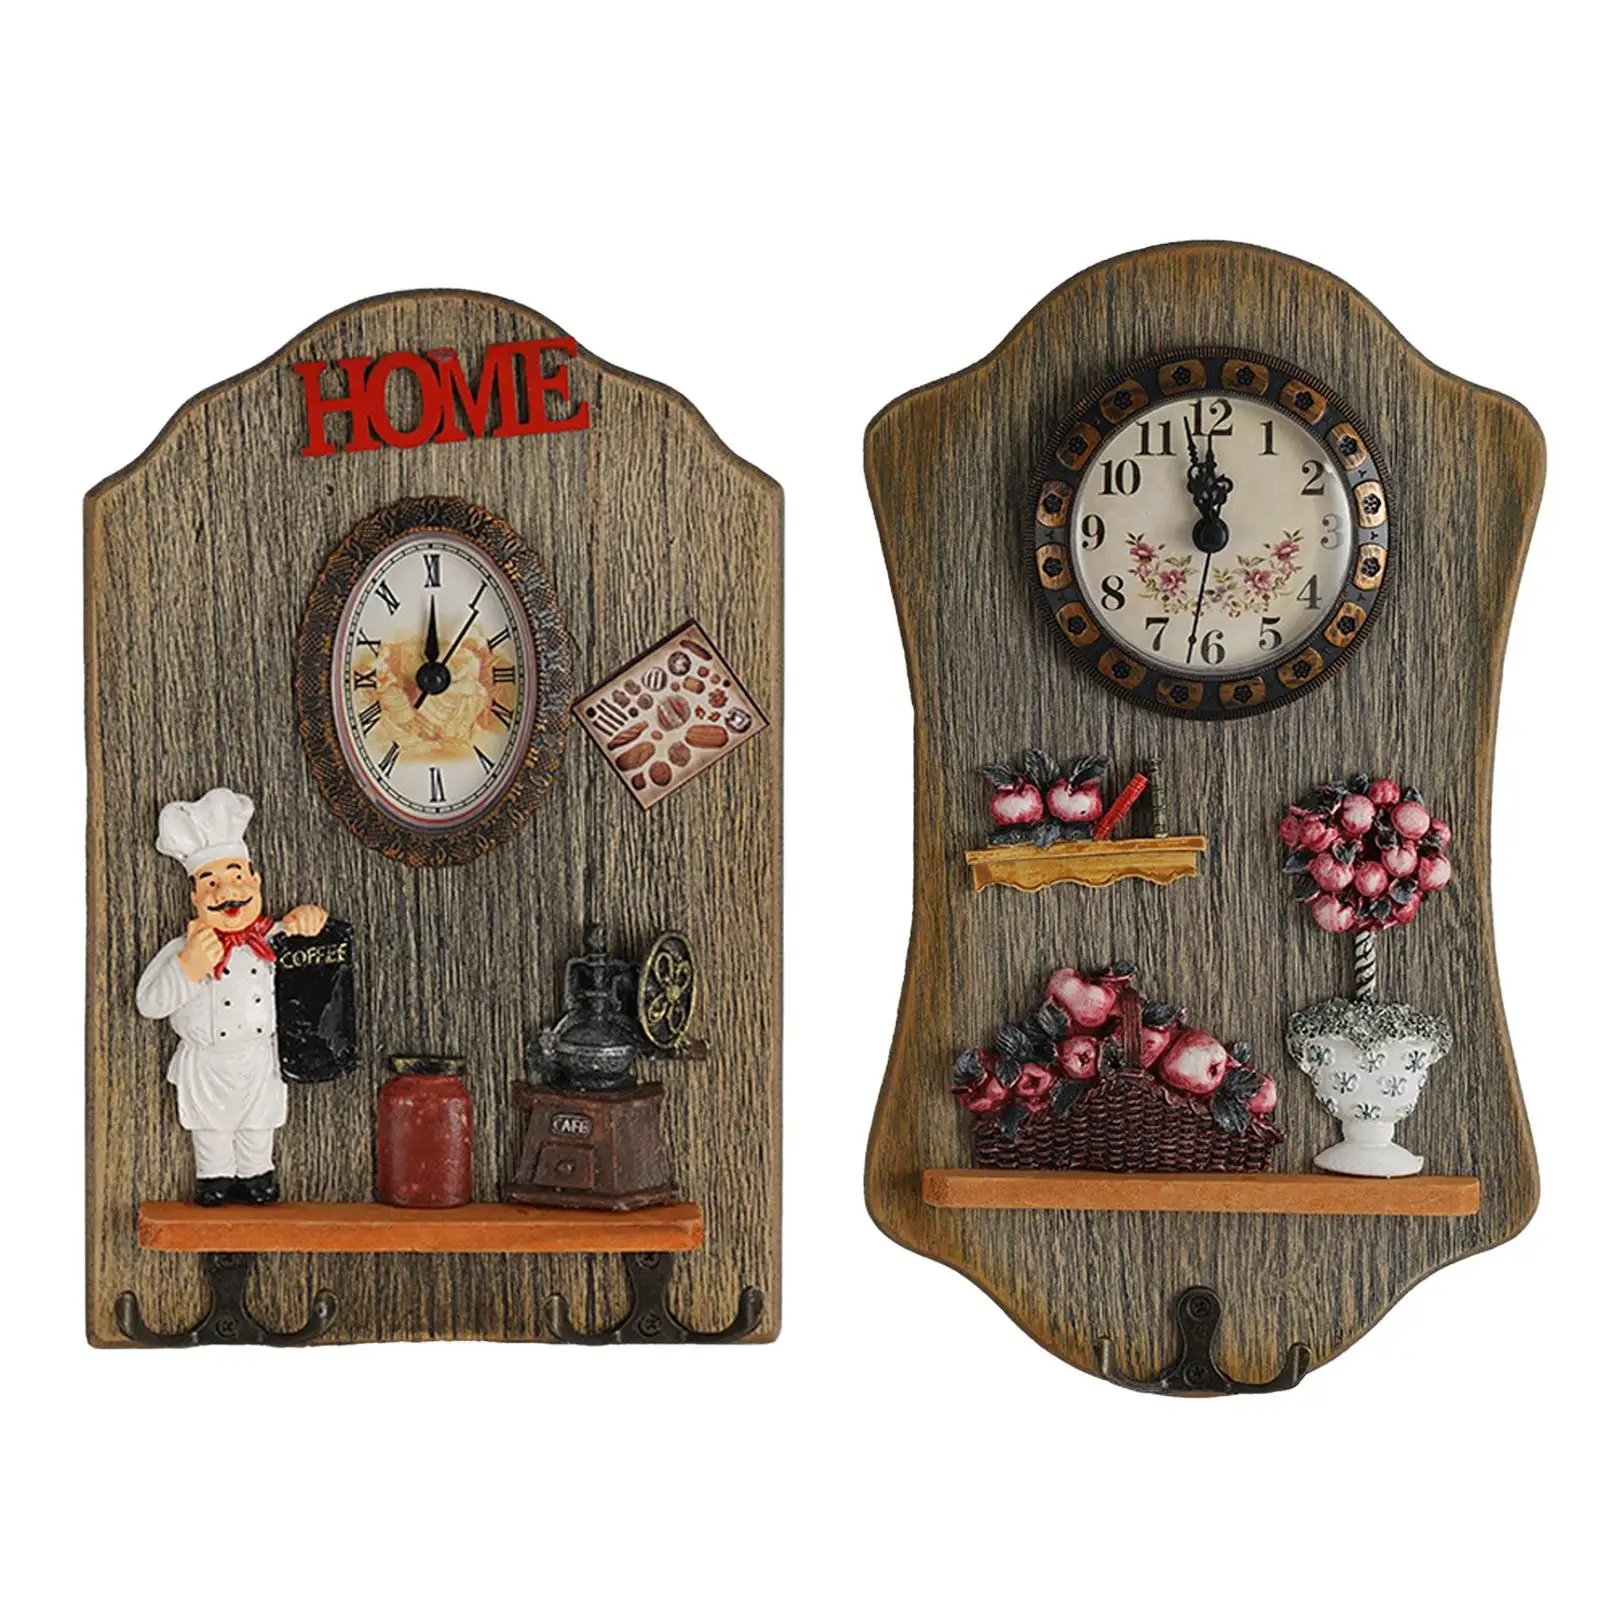 Rustic Wall Clock, Creative Hanging, Collectable Ornament Clocks for Kitchen Decoration Gift